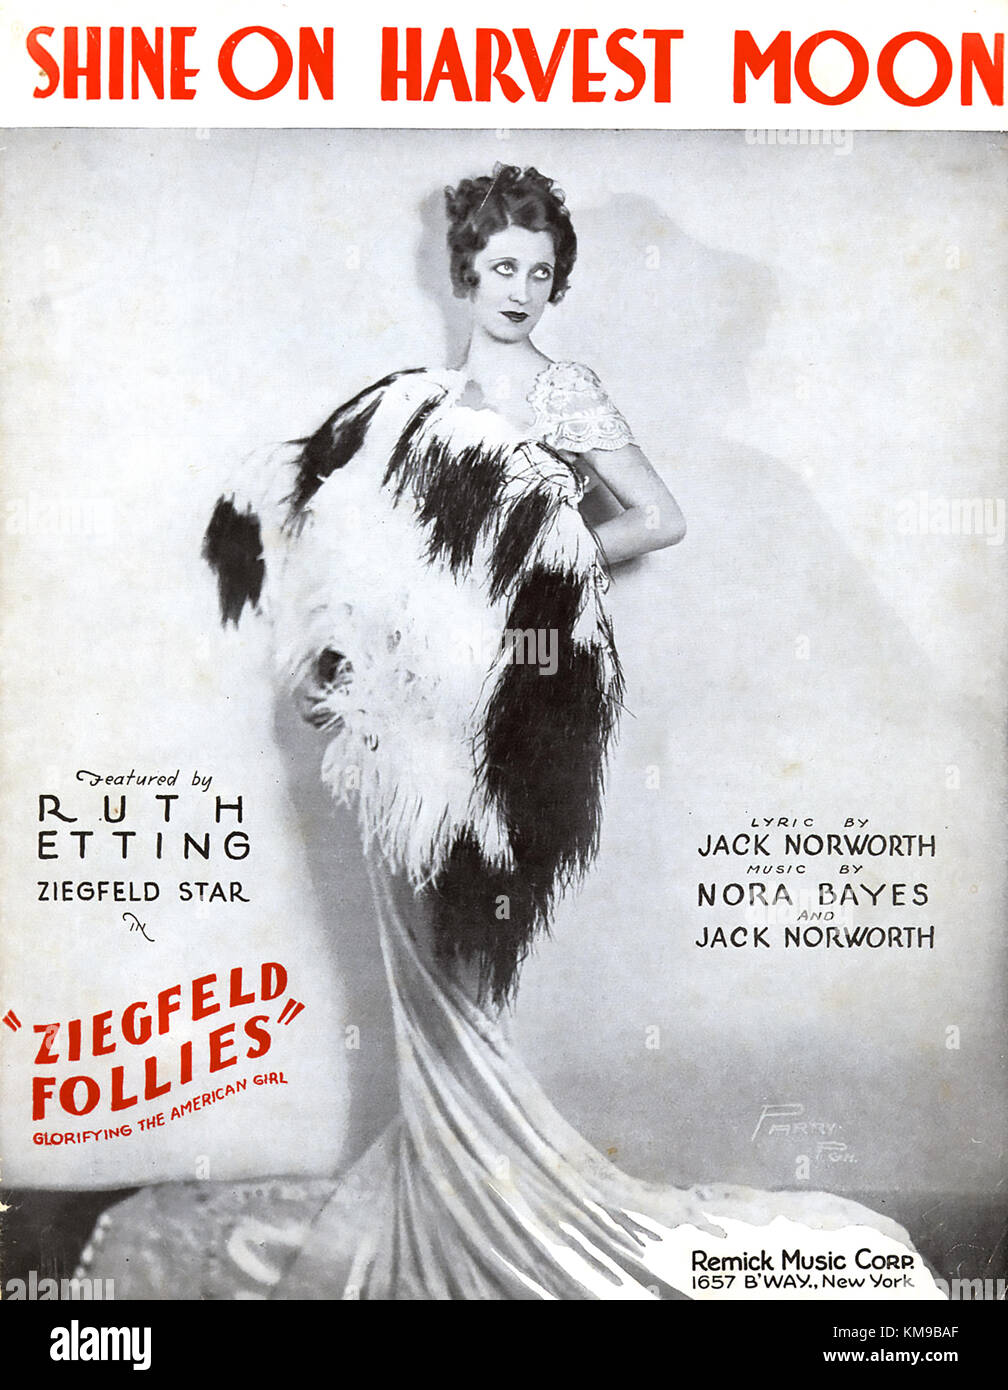 RUTH ETTING (1897-1978) American singer and film actress. Sheet music in 1919 for her song from one of the Ziegfeld Follies shows Stock Photo